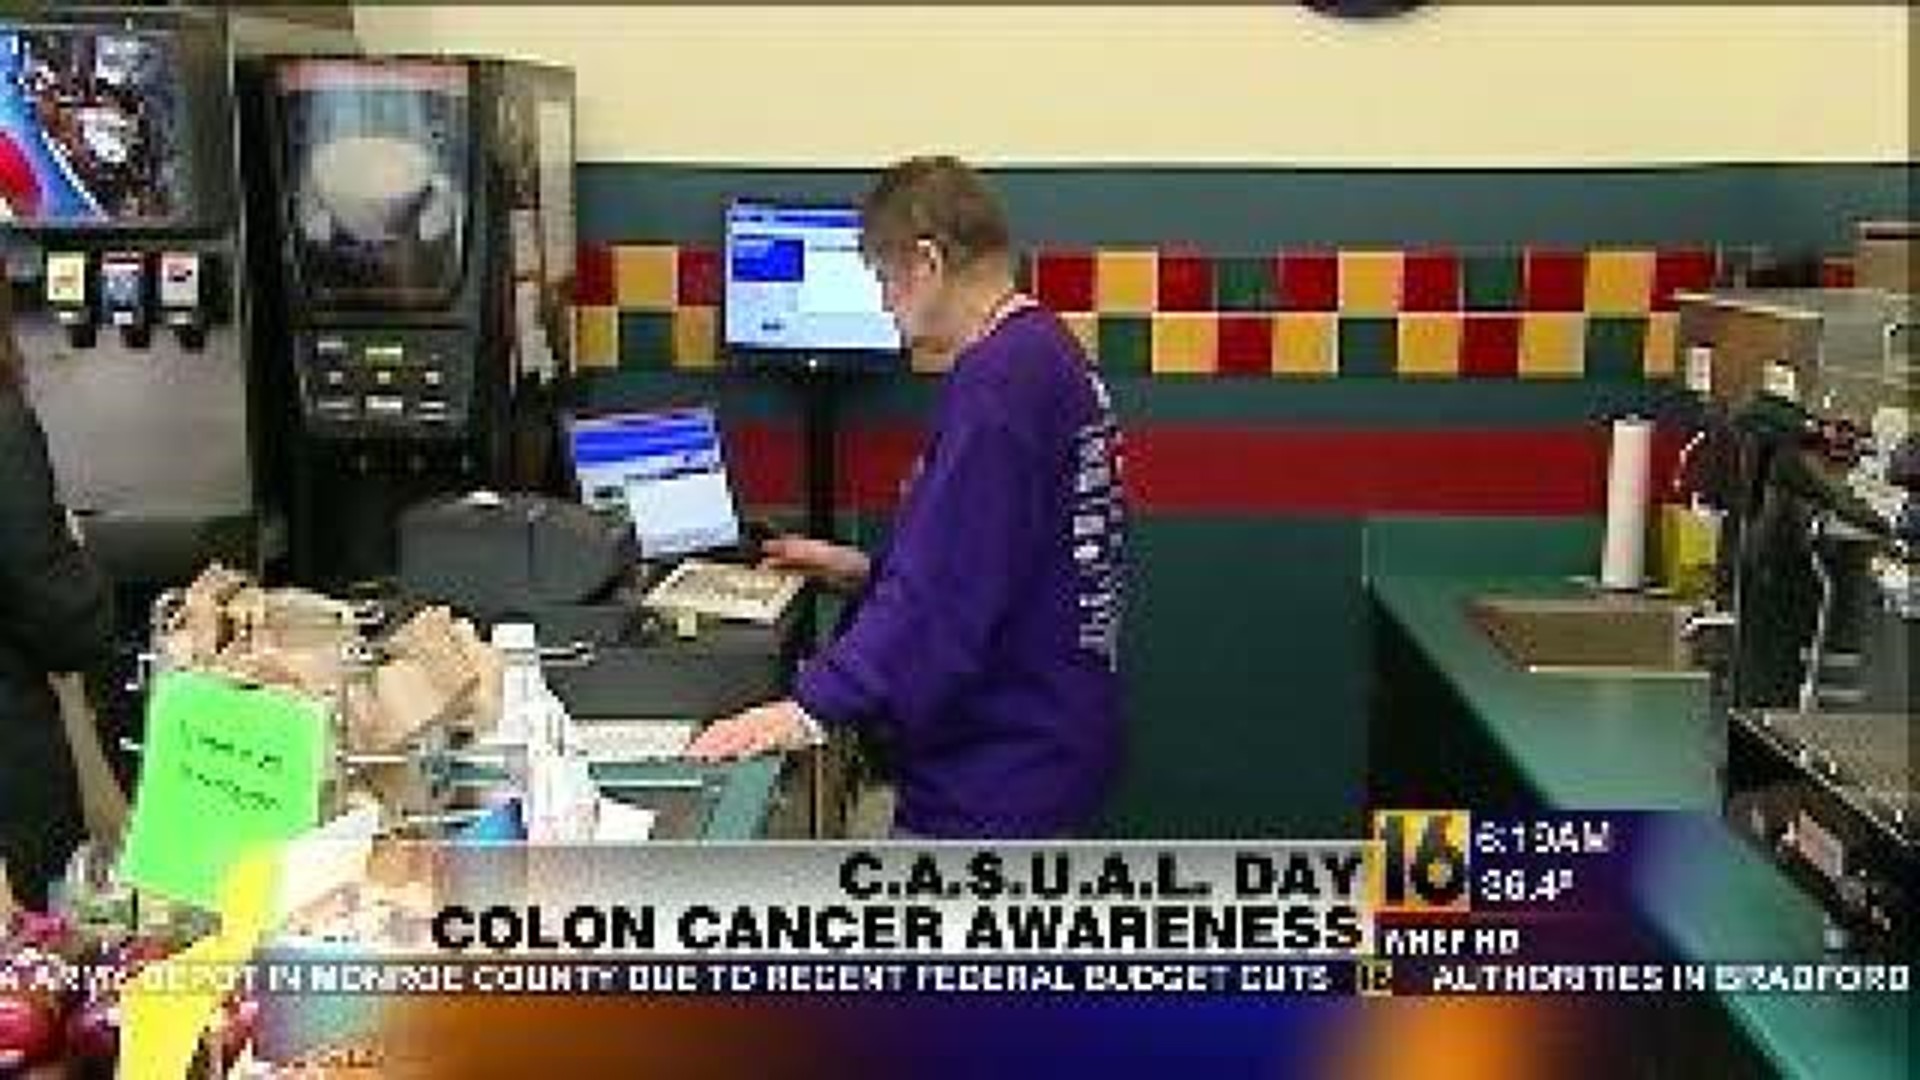 C.A.S.U.A.L. Day: Creating Colon Cancer Awareness